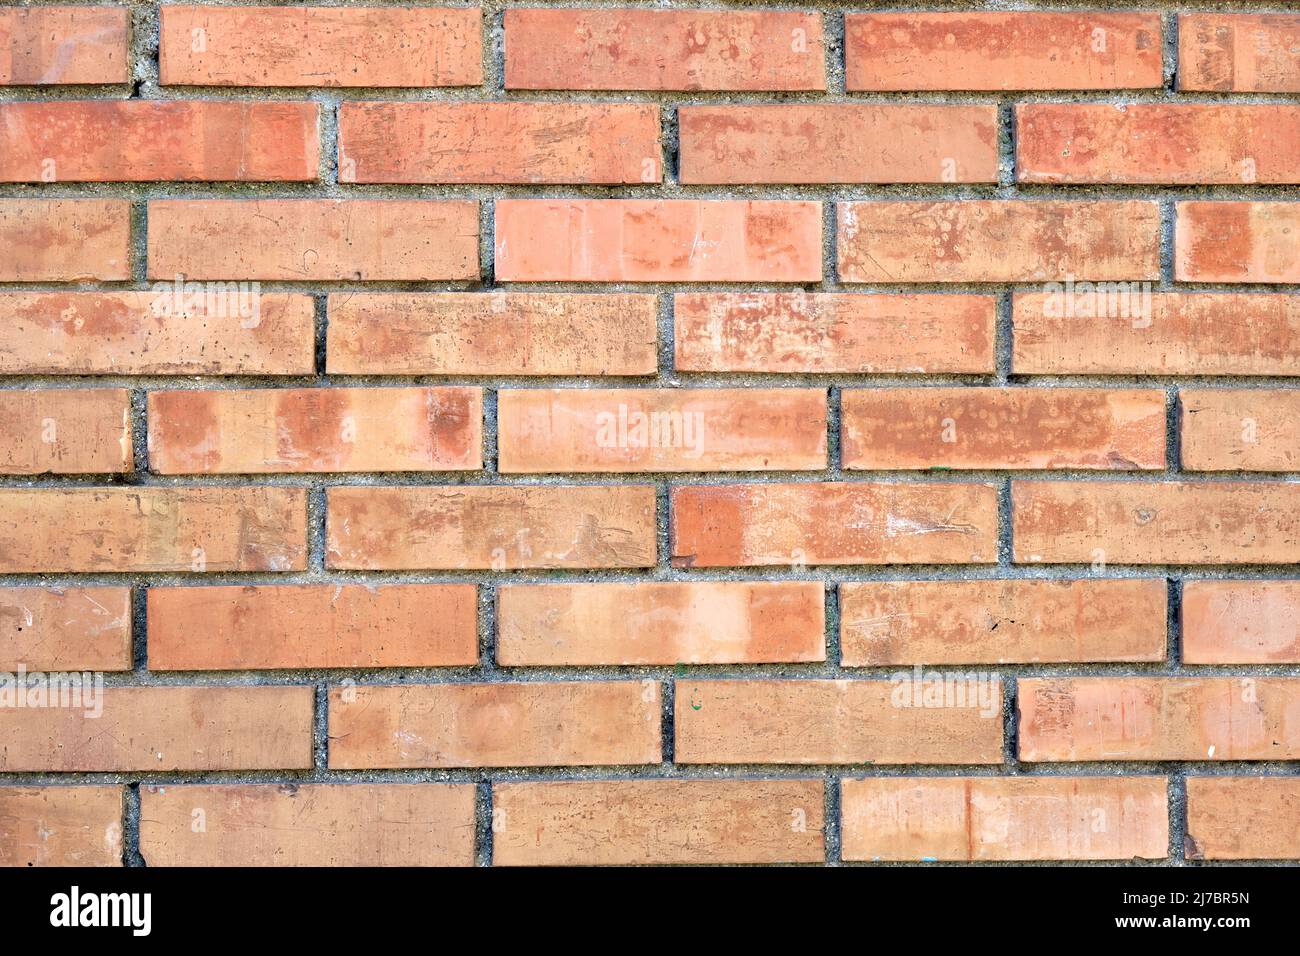 Background from a wall made of orange bricks Stock Photo